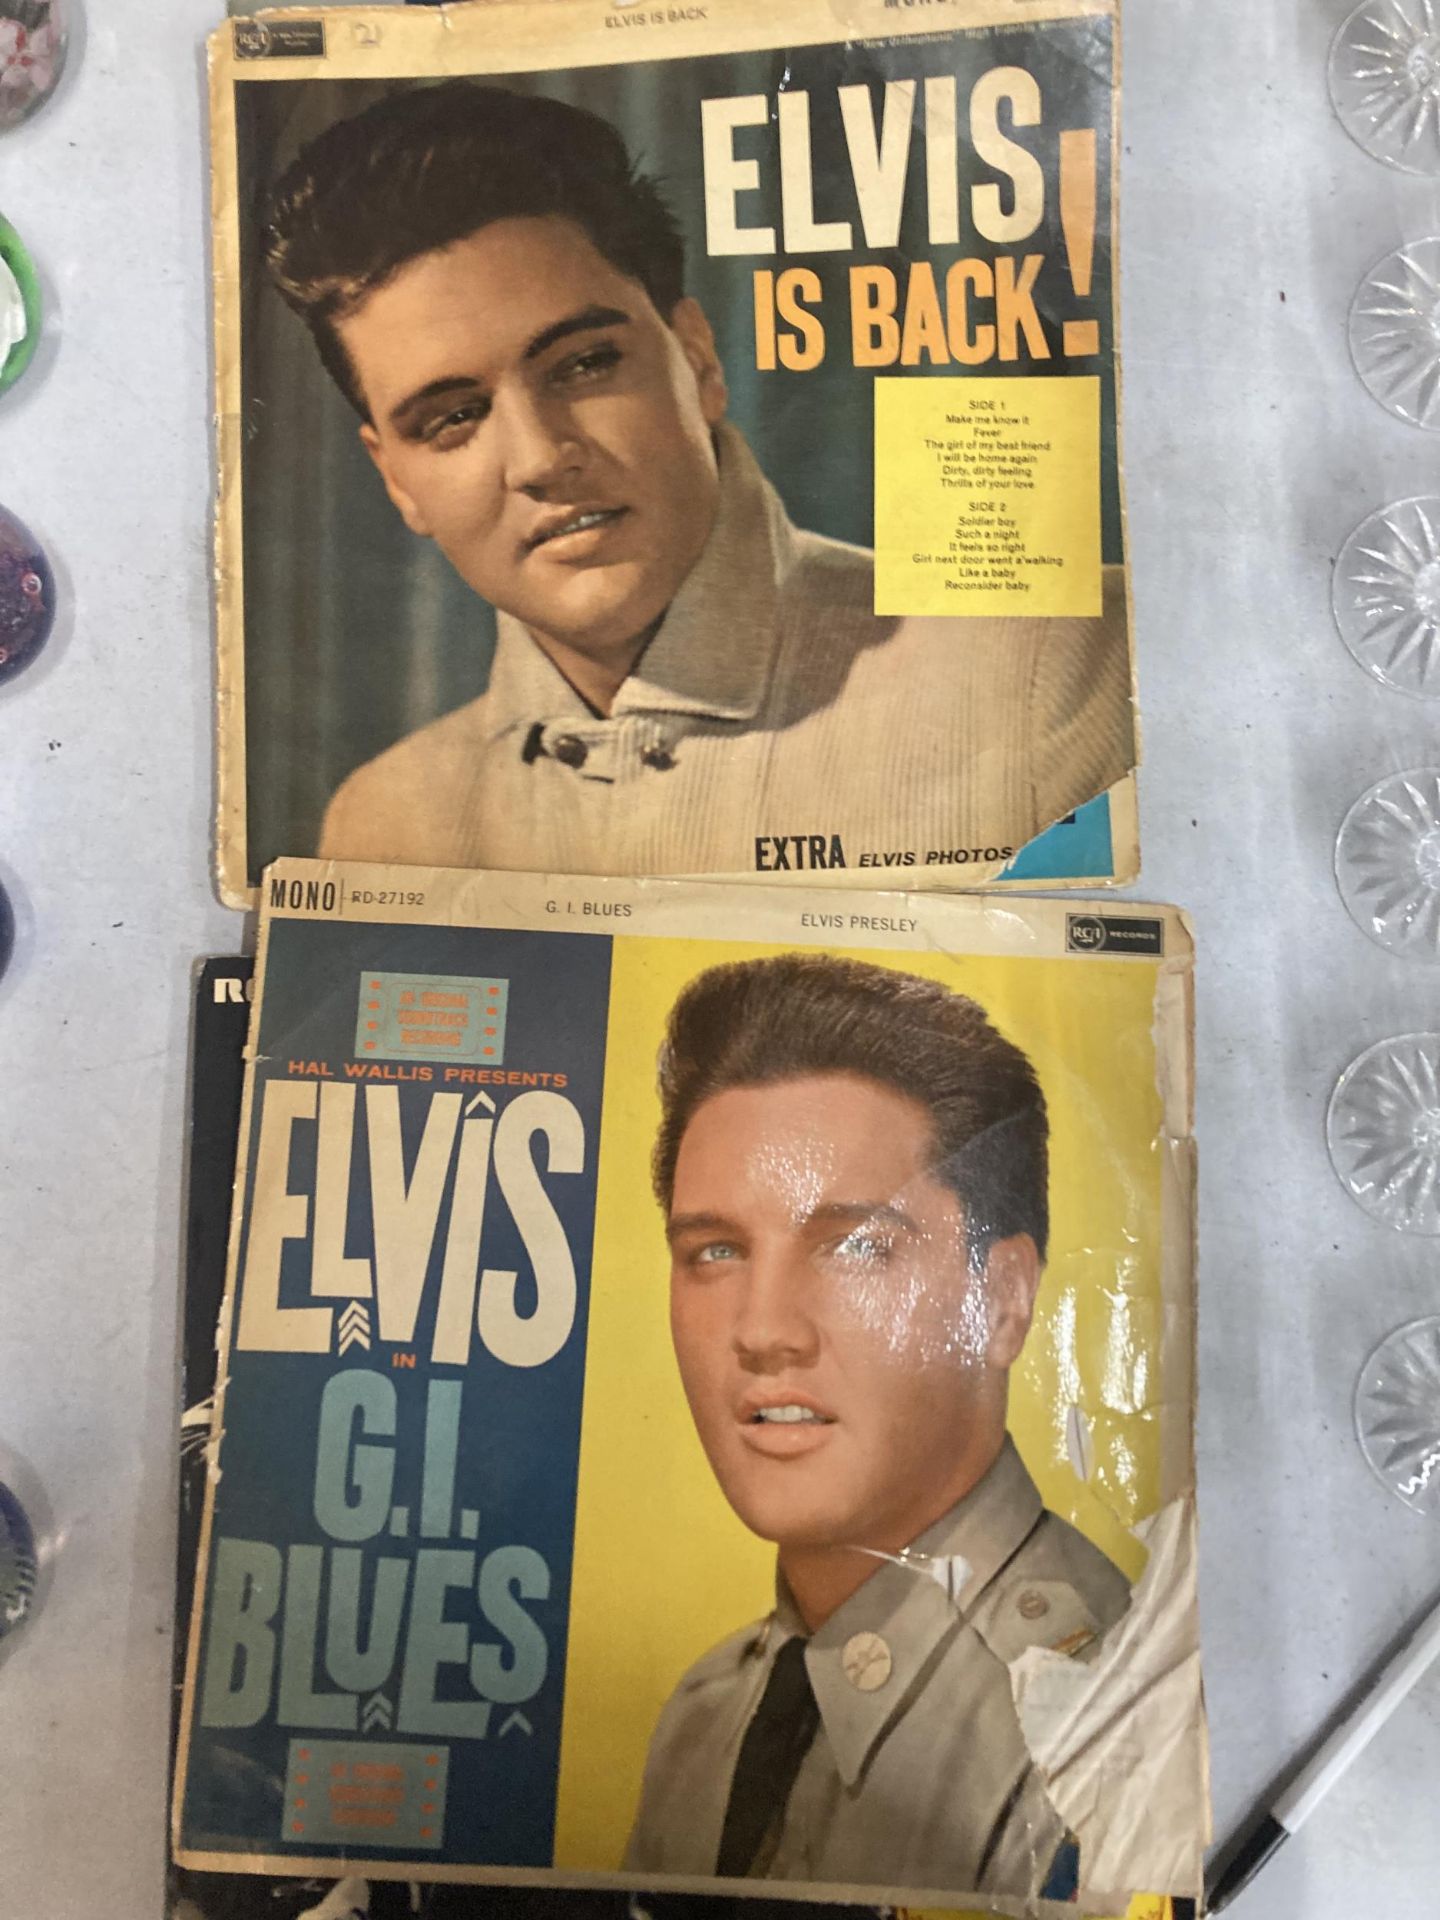 A QUANTITY OF 33RPM VINYL ELVIS PRESLEY RECORDS PLUS A COLLECTION OF 45RPM BEATLES SINGLES - Image 6 of 6